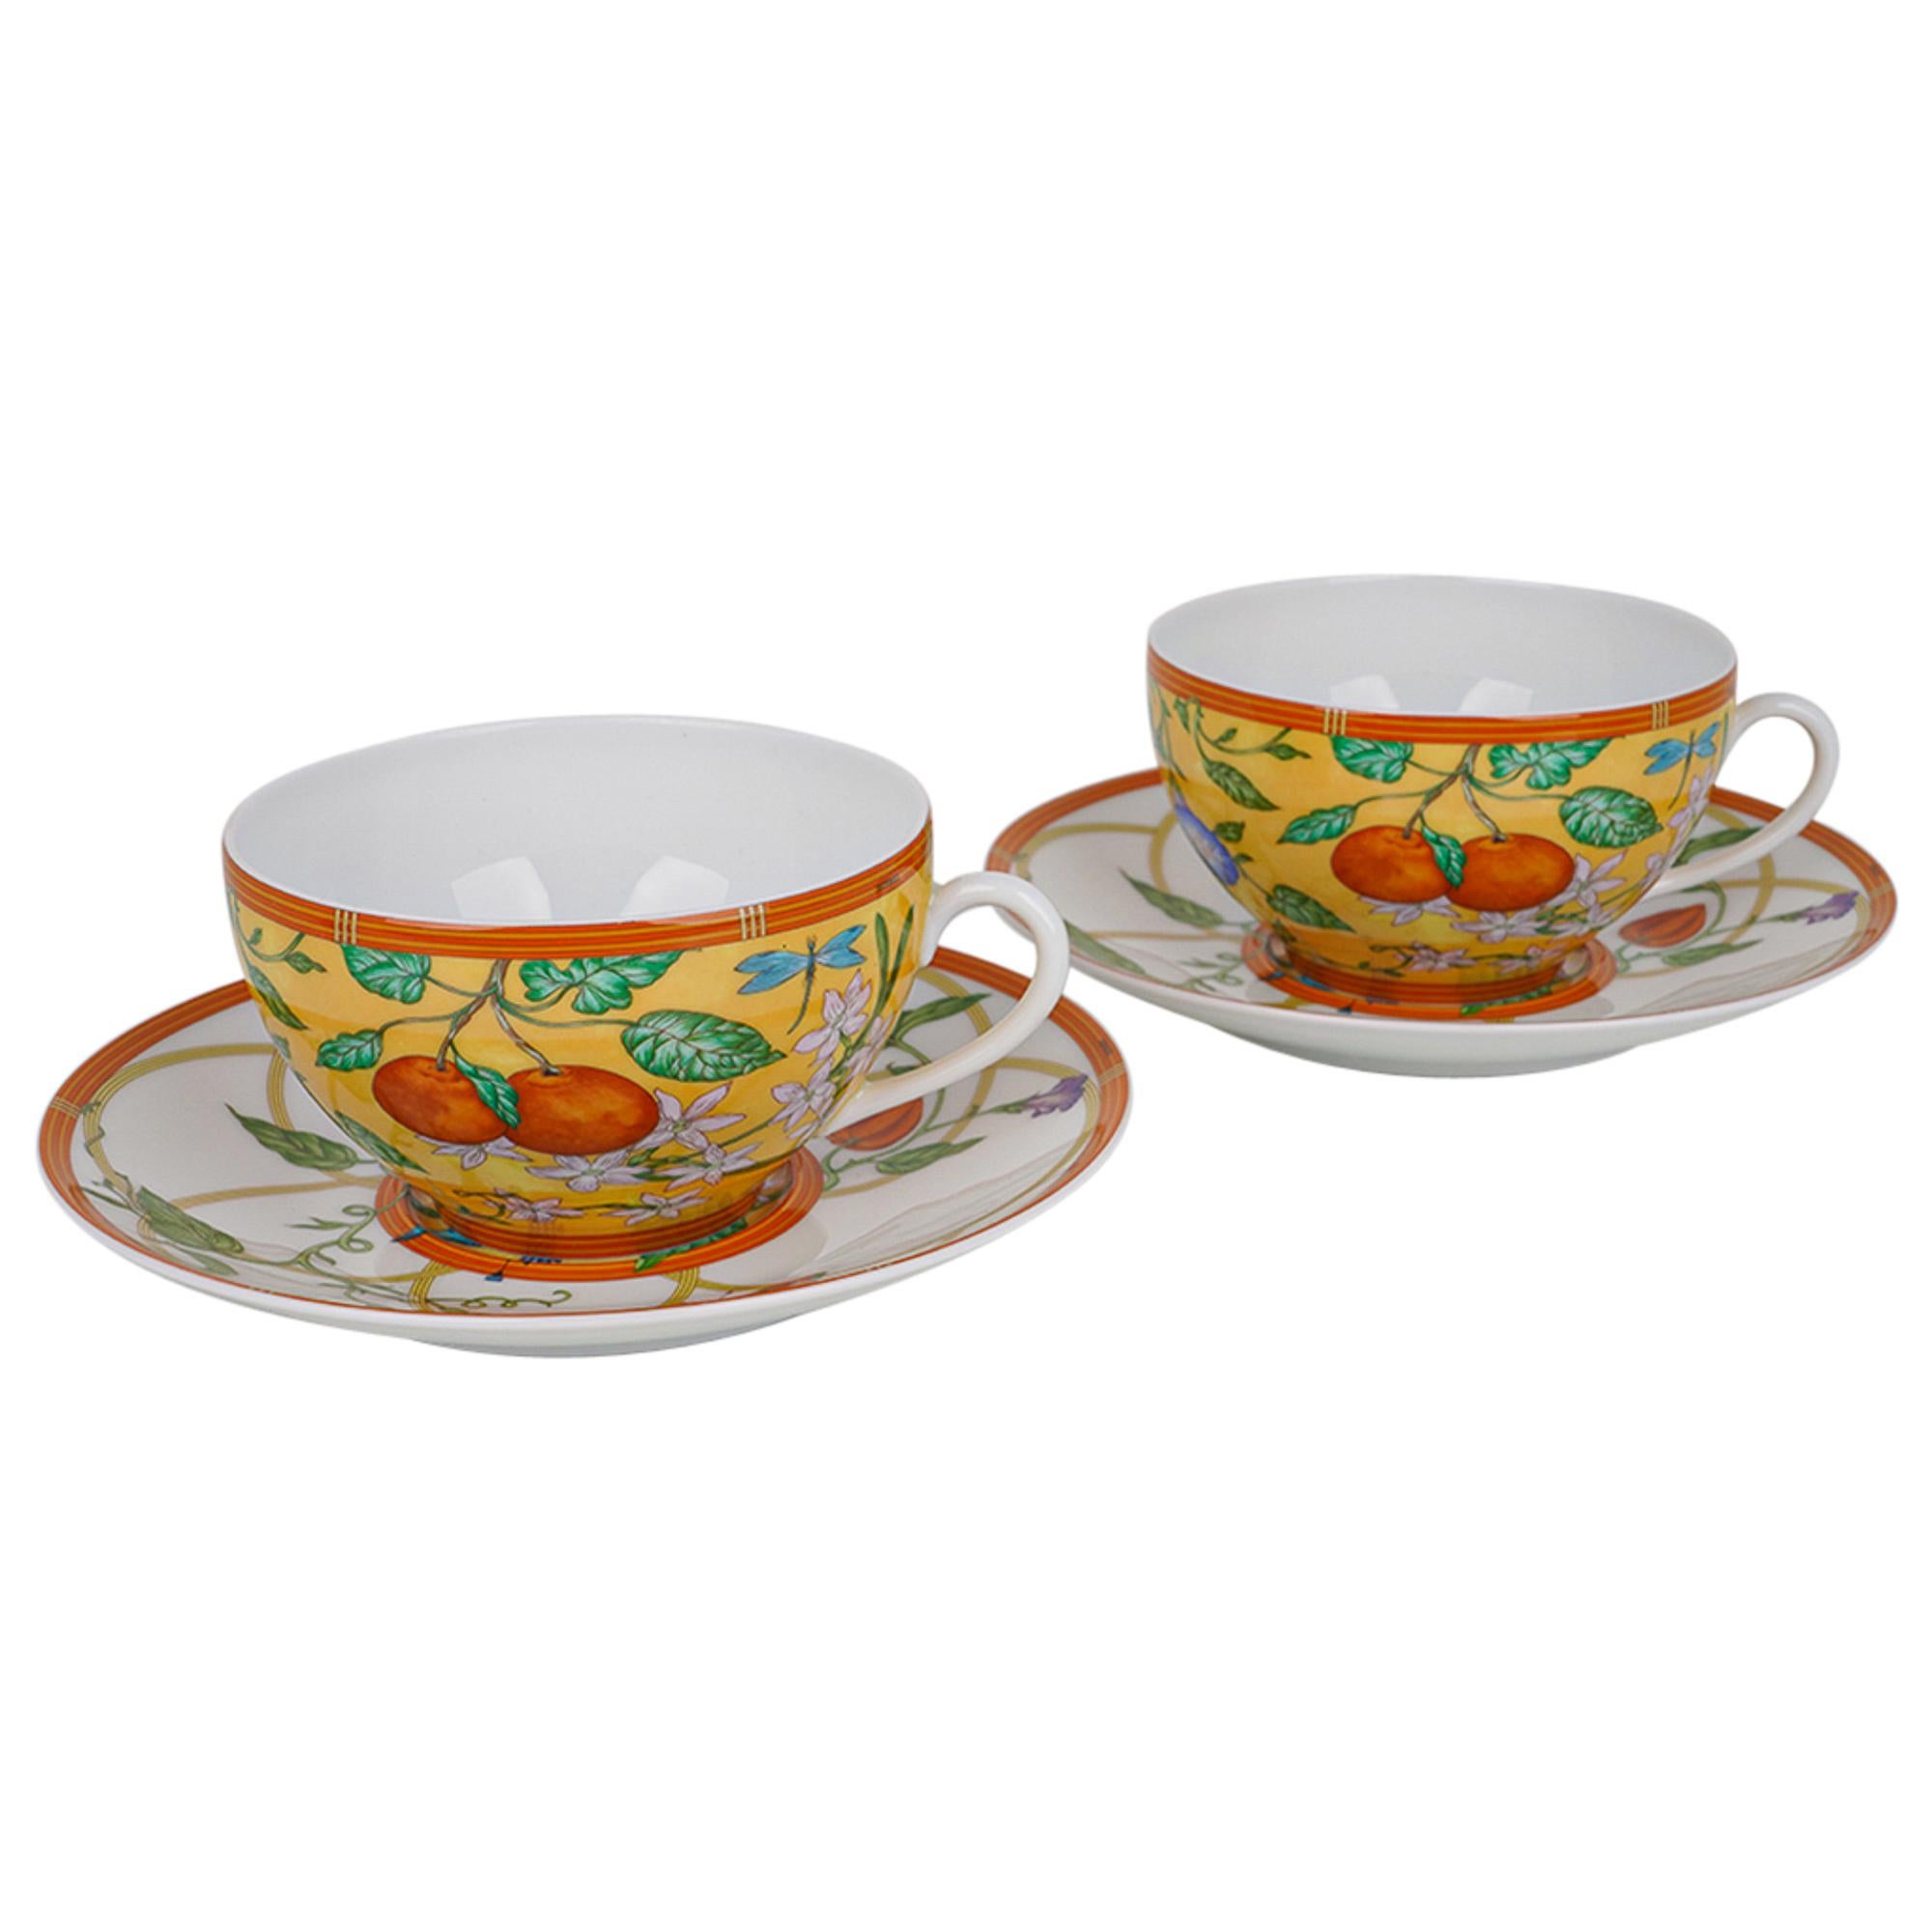 Hermes La Siesta Breakfast Cup and Saucer Porcelain Set of 2 New w/Box 1